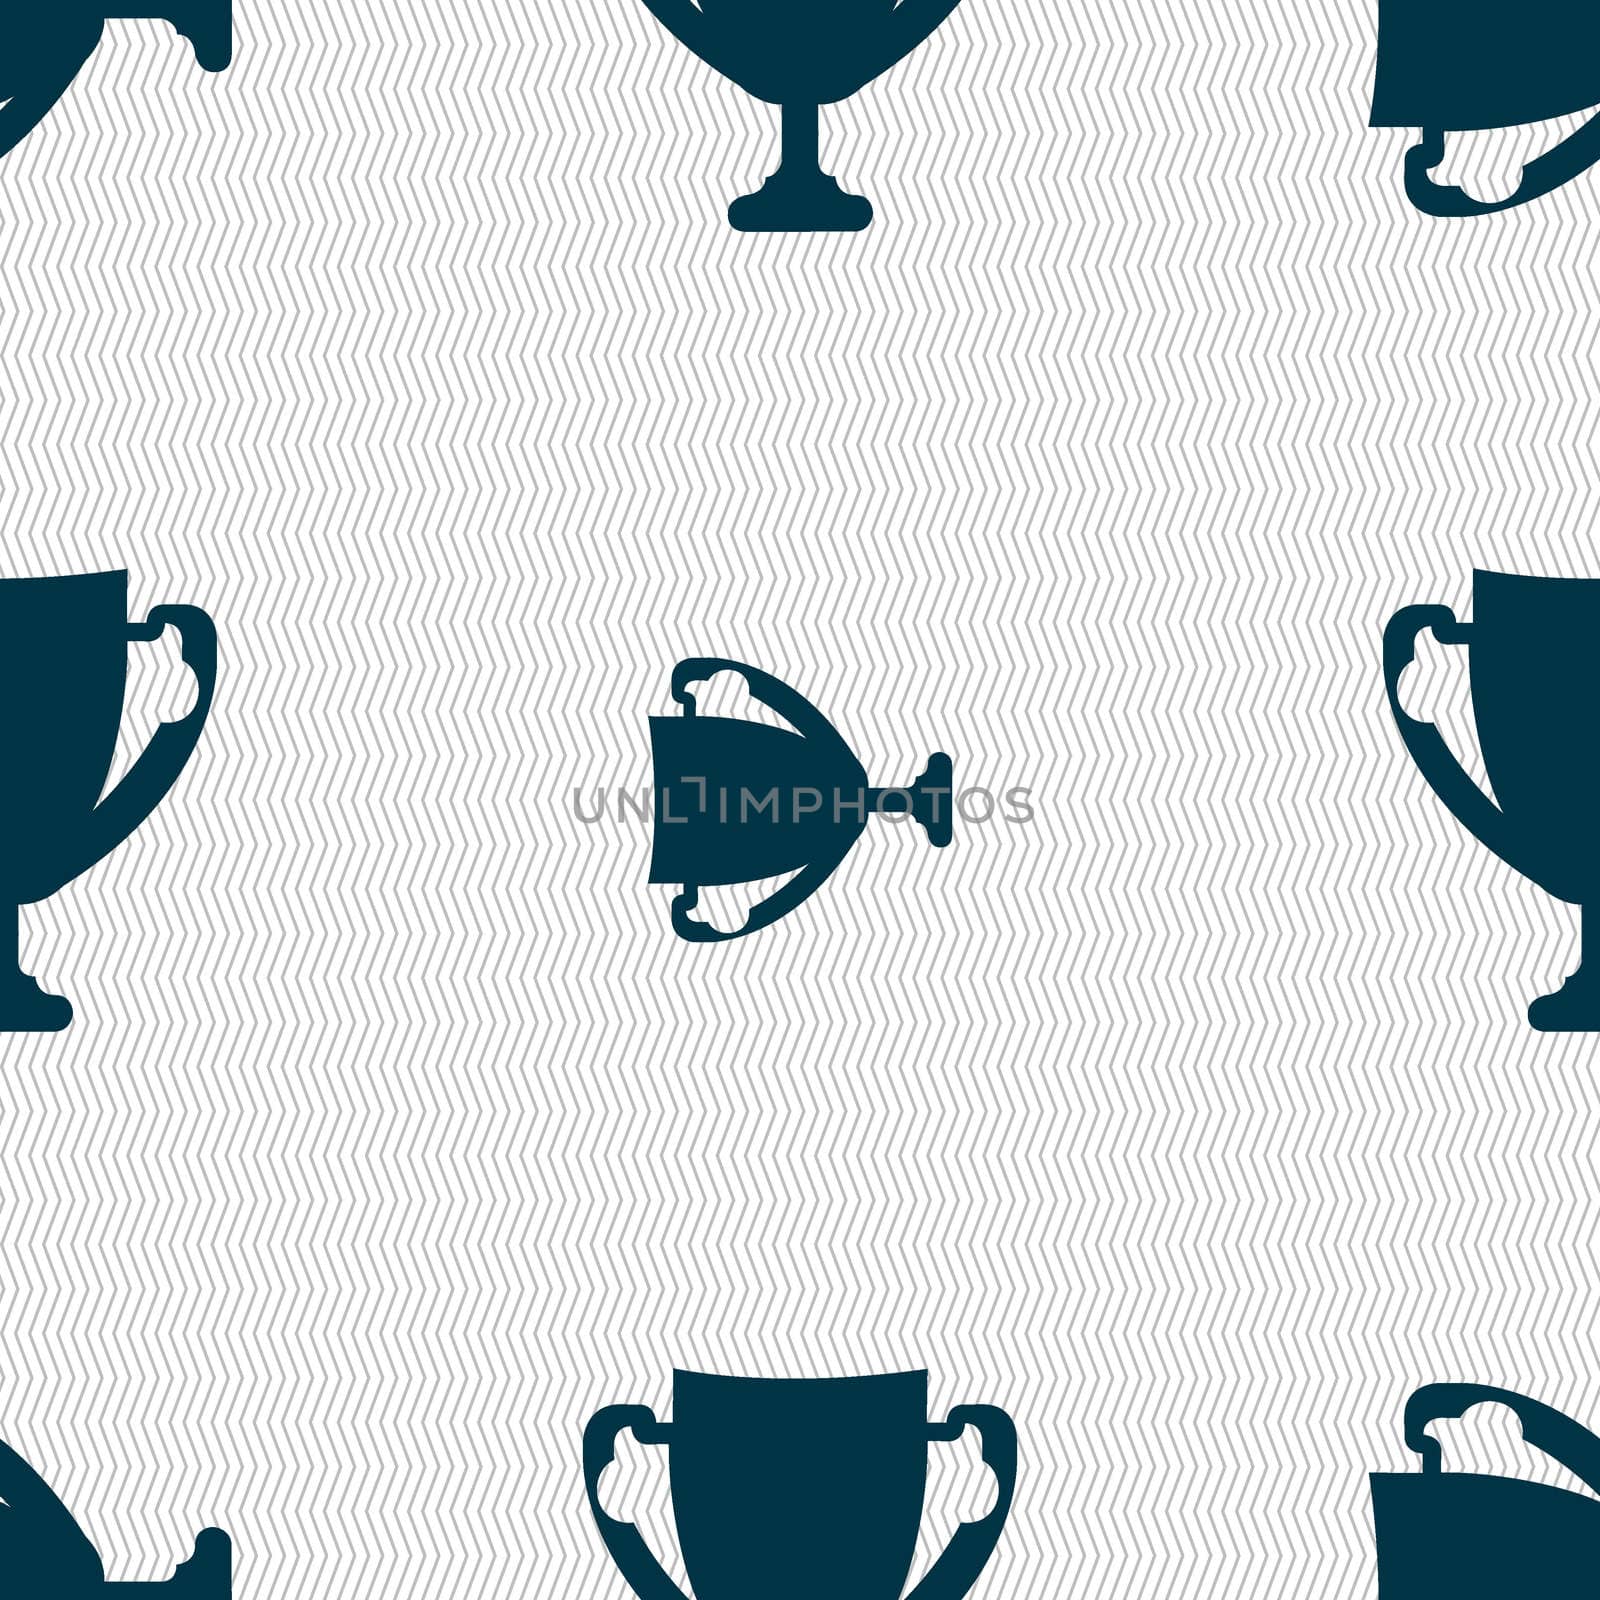 Winner cup sign icon. Awarding of winners symbol. Trophy. Seamless abstract background with geometric shapes. illustration